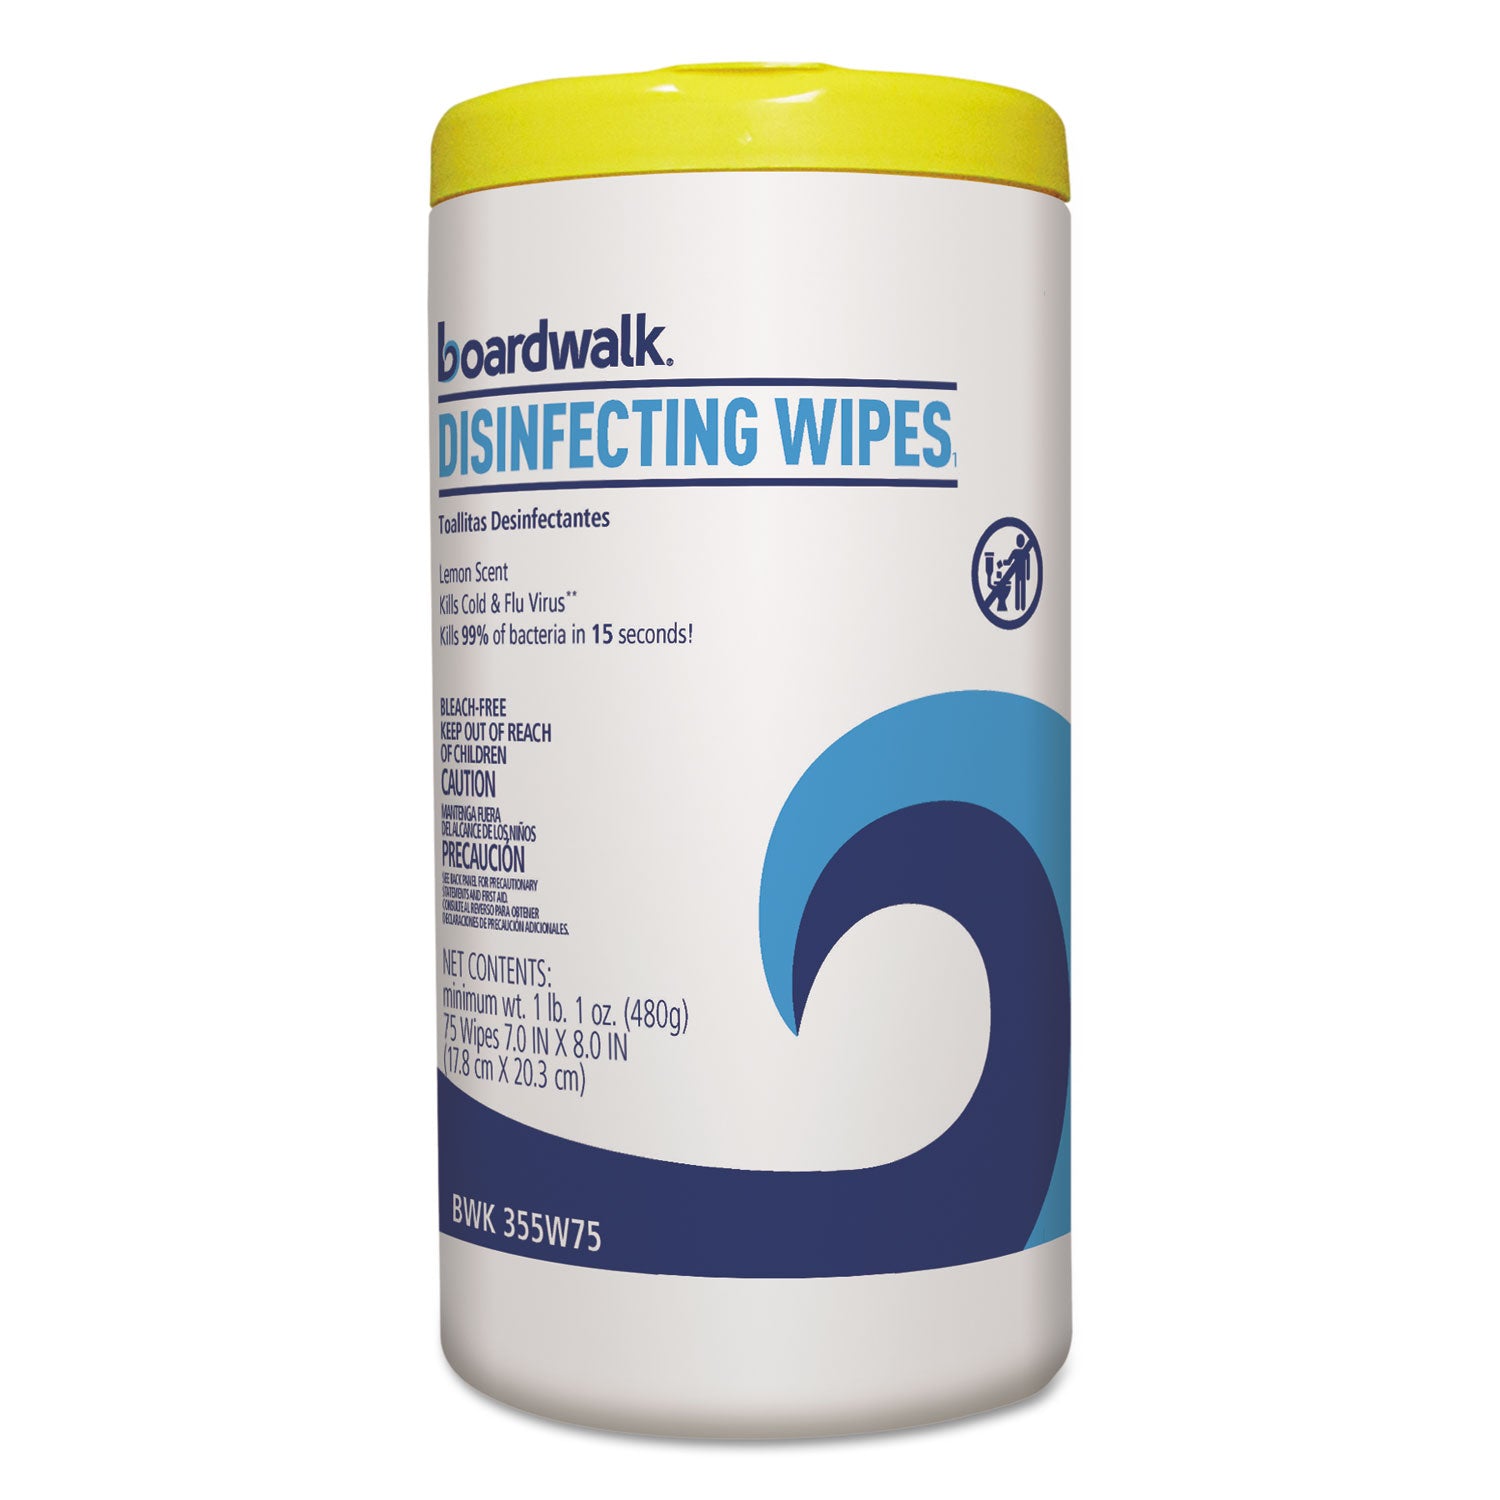 Boardwalk Disinfecting Wipes, 8 X 7, Lemon Scent, 75/Canister, 6 Canisters/Carton - BWK455W75